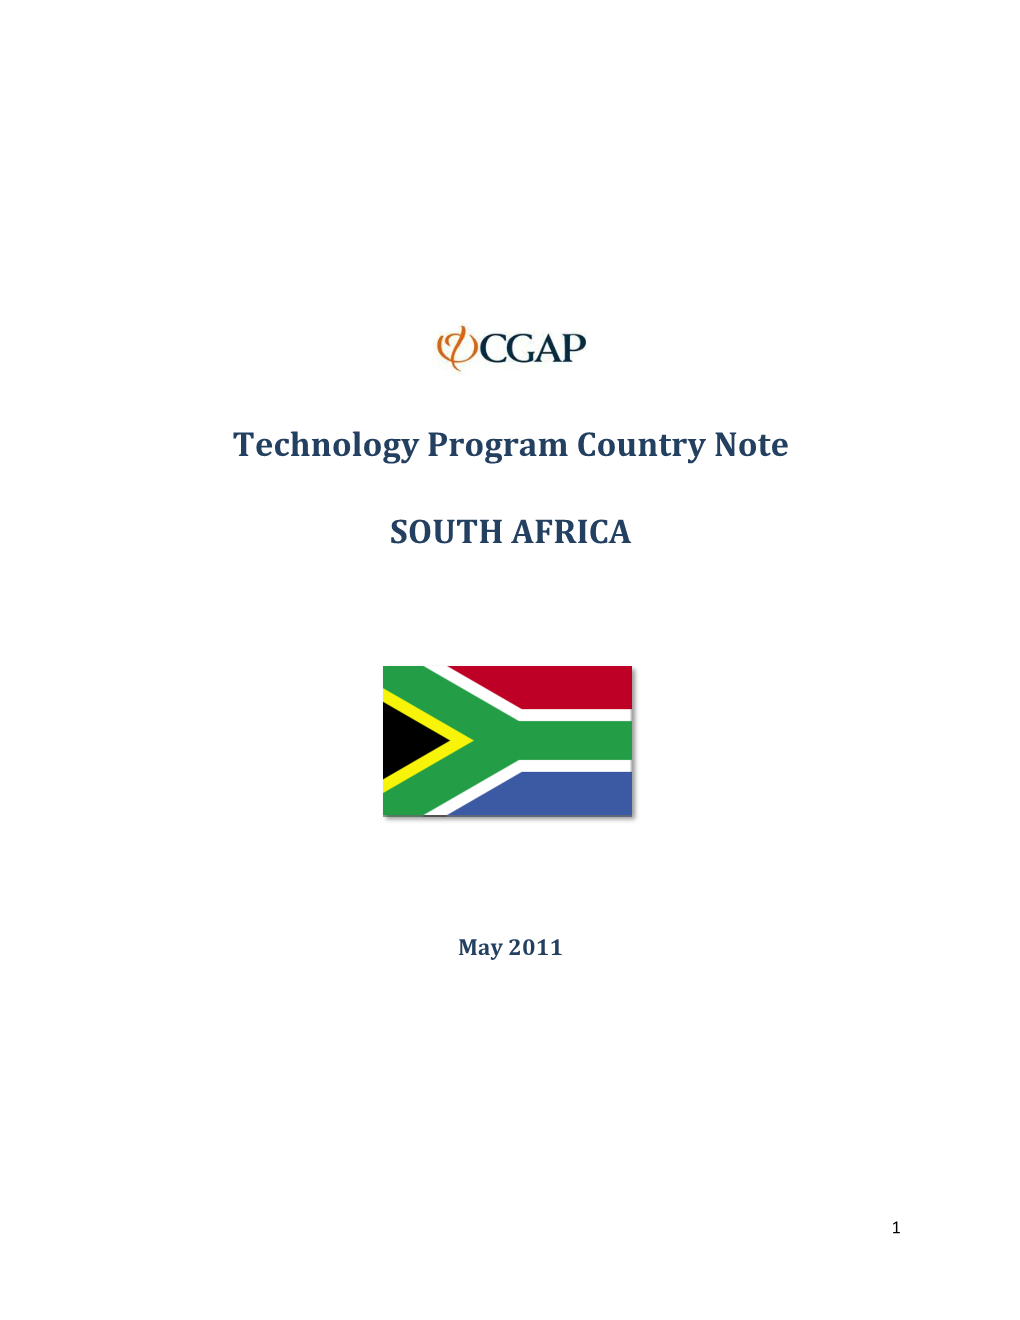 CGAP Technology Program Country Note South Africa